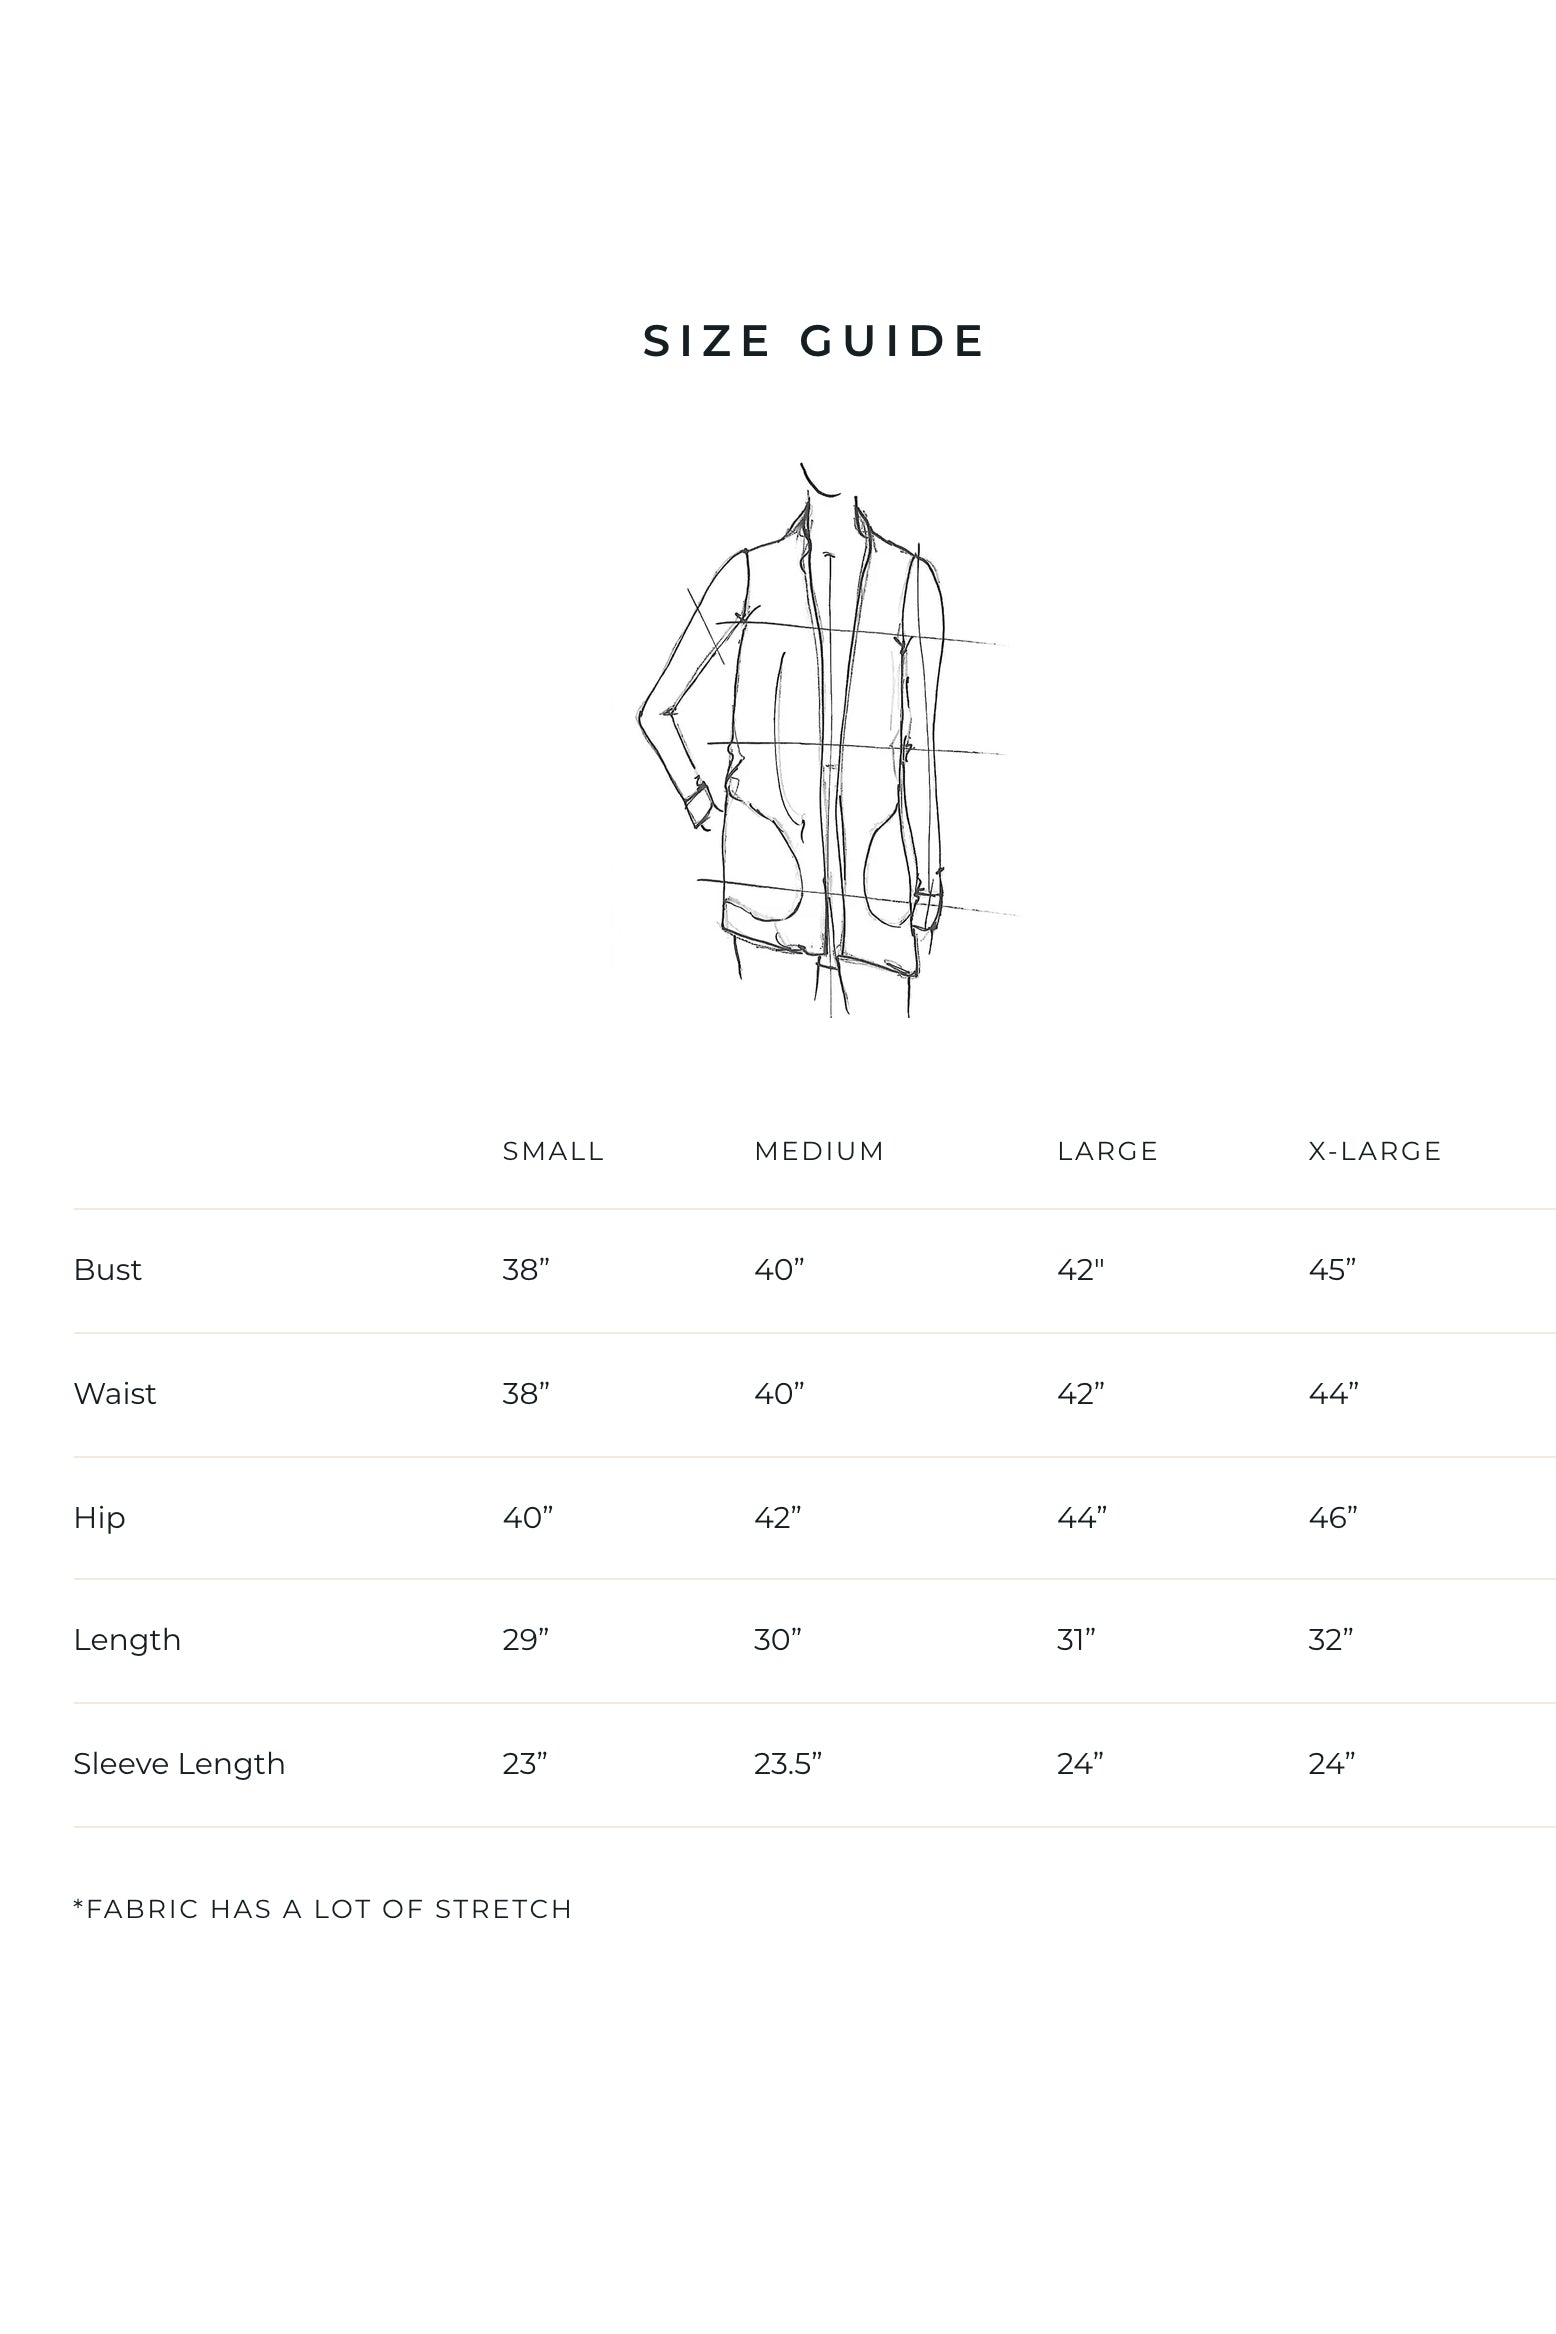 Classic Briton Cardigan by Blondie, size chart